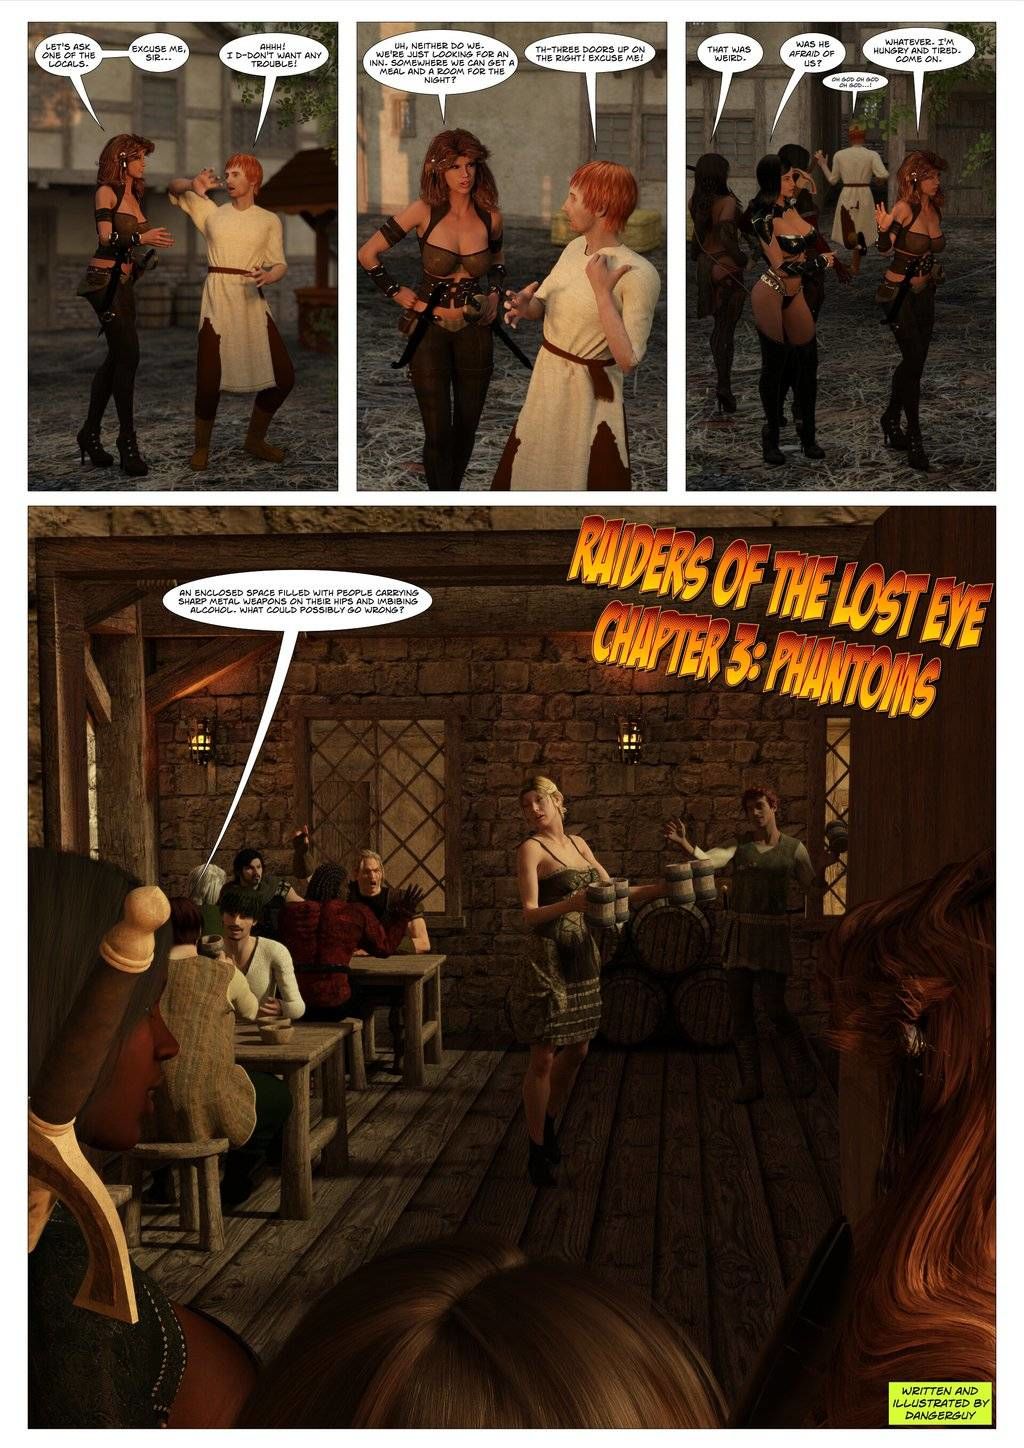 Raiders of the Lost Eye 3- PHANTOMS page 1